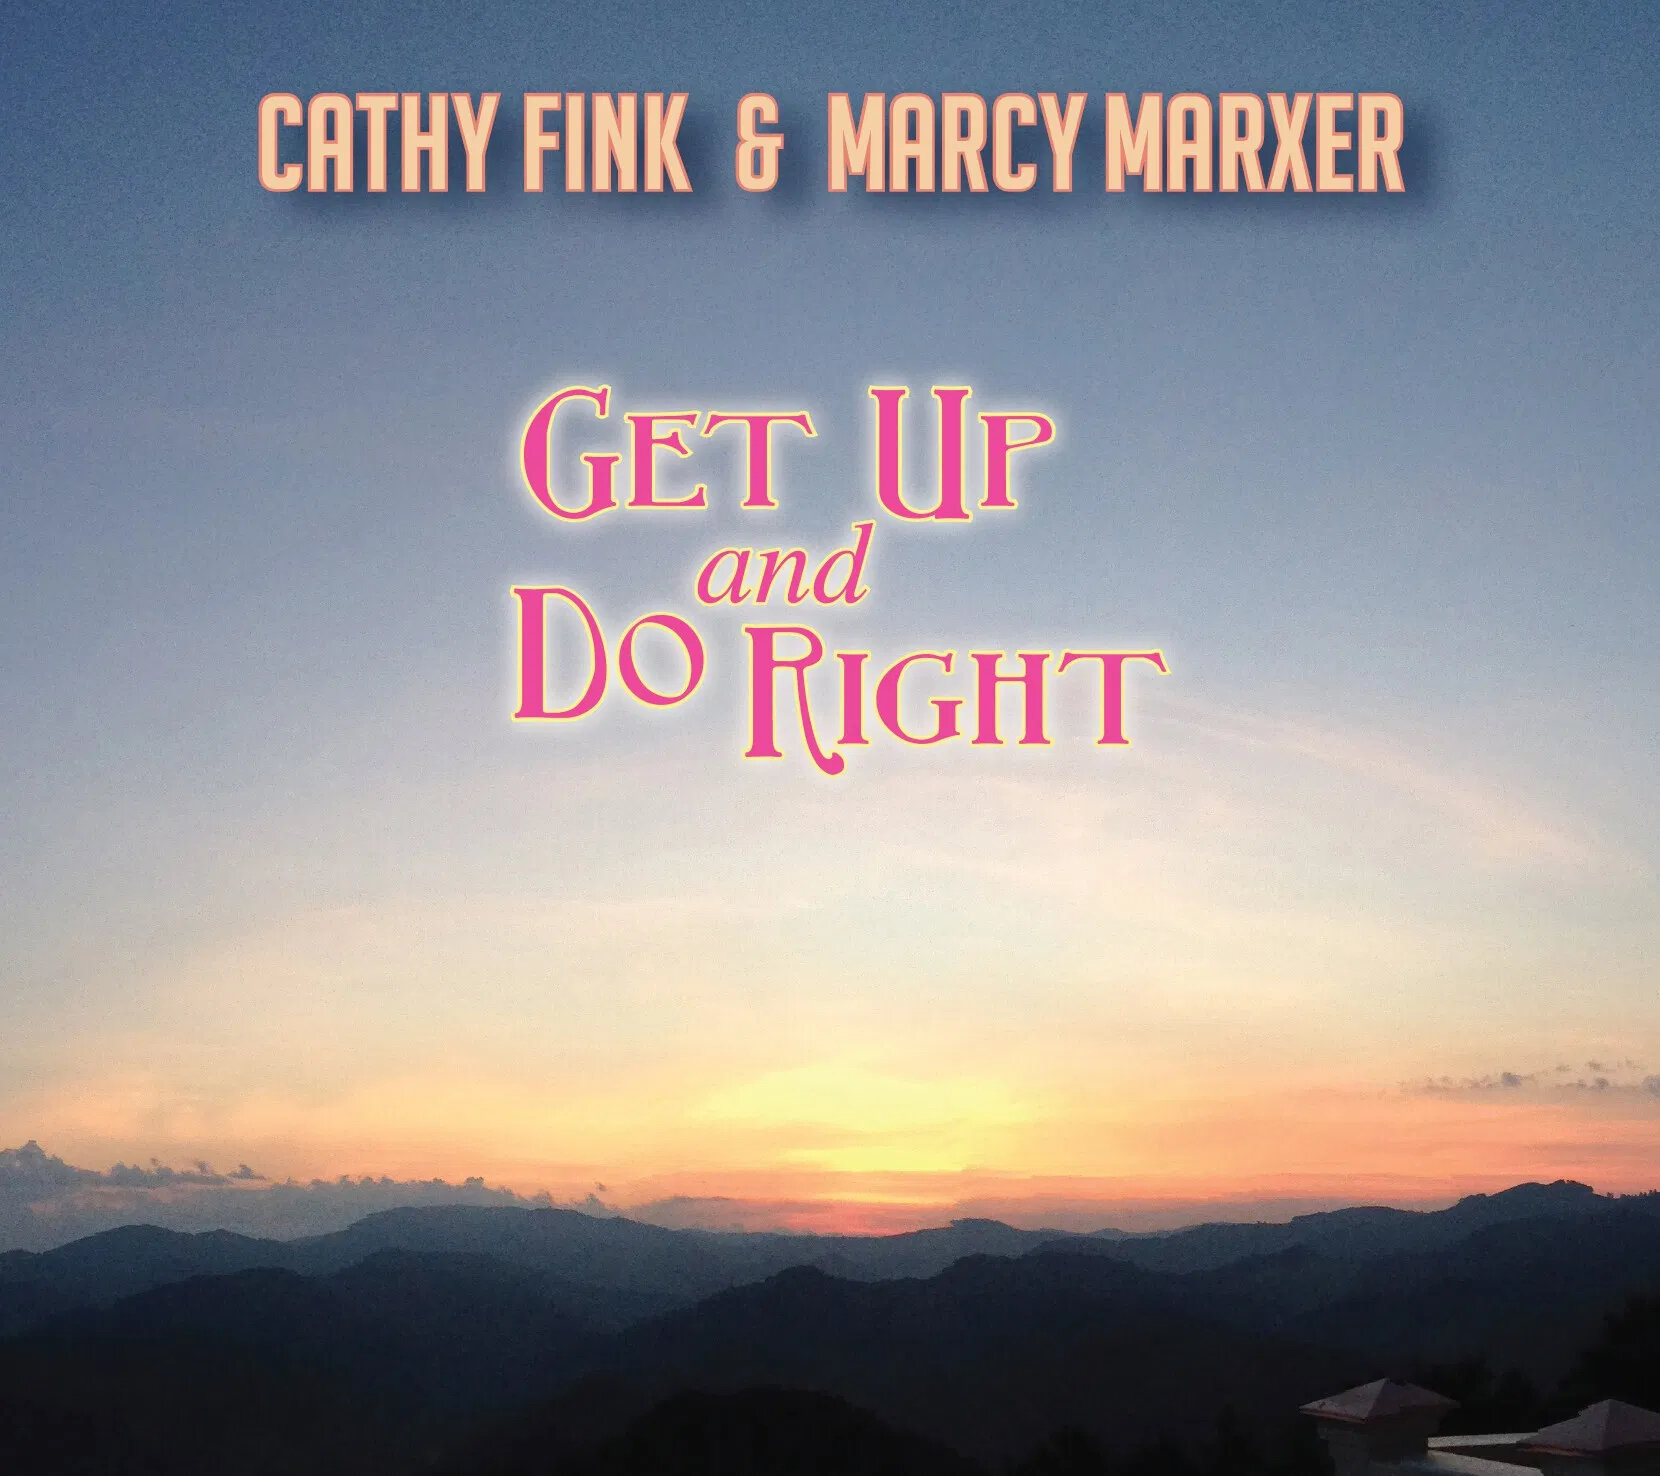 <b>Cathy Fink & Marcy Marxer</b></br>Get Up And Do Right</br><I><small>Stereo Master</small></I>